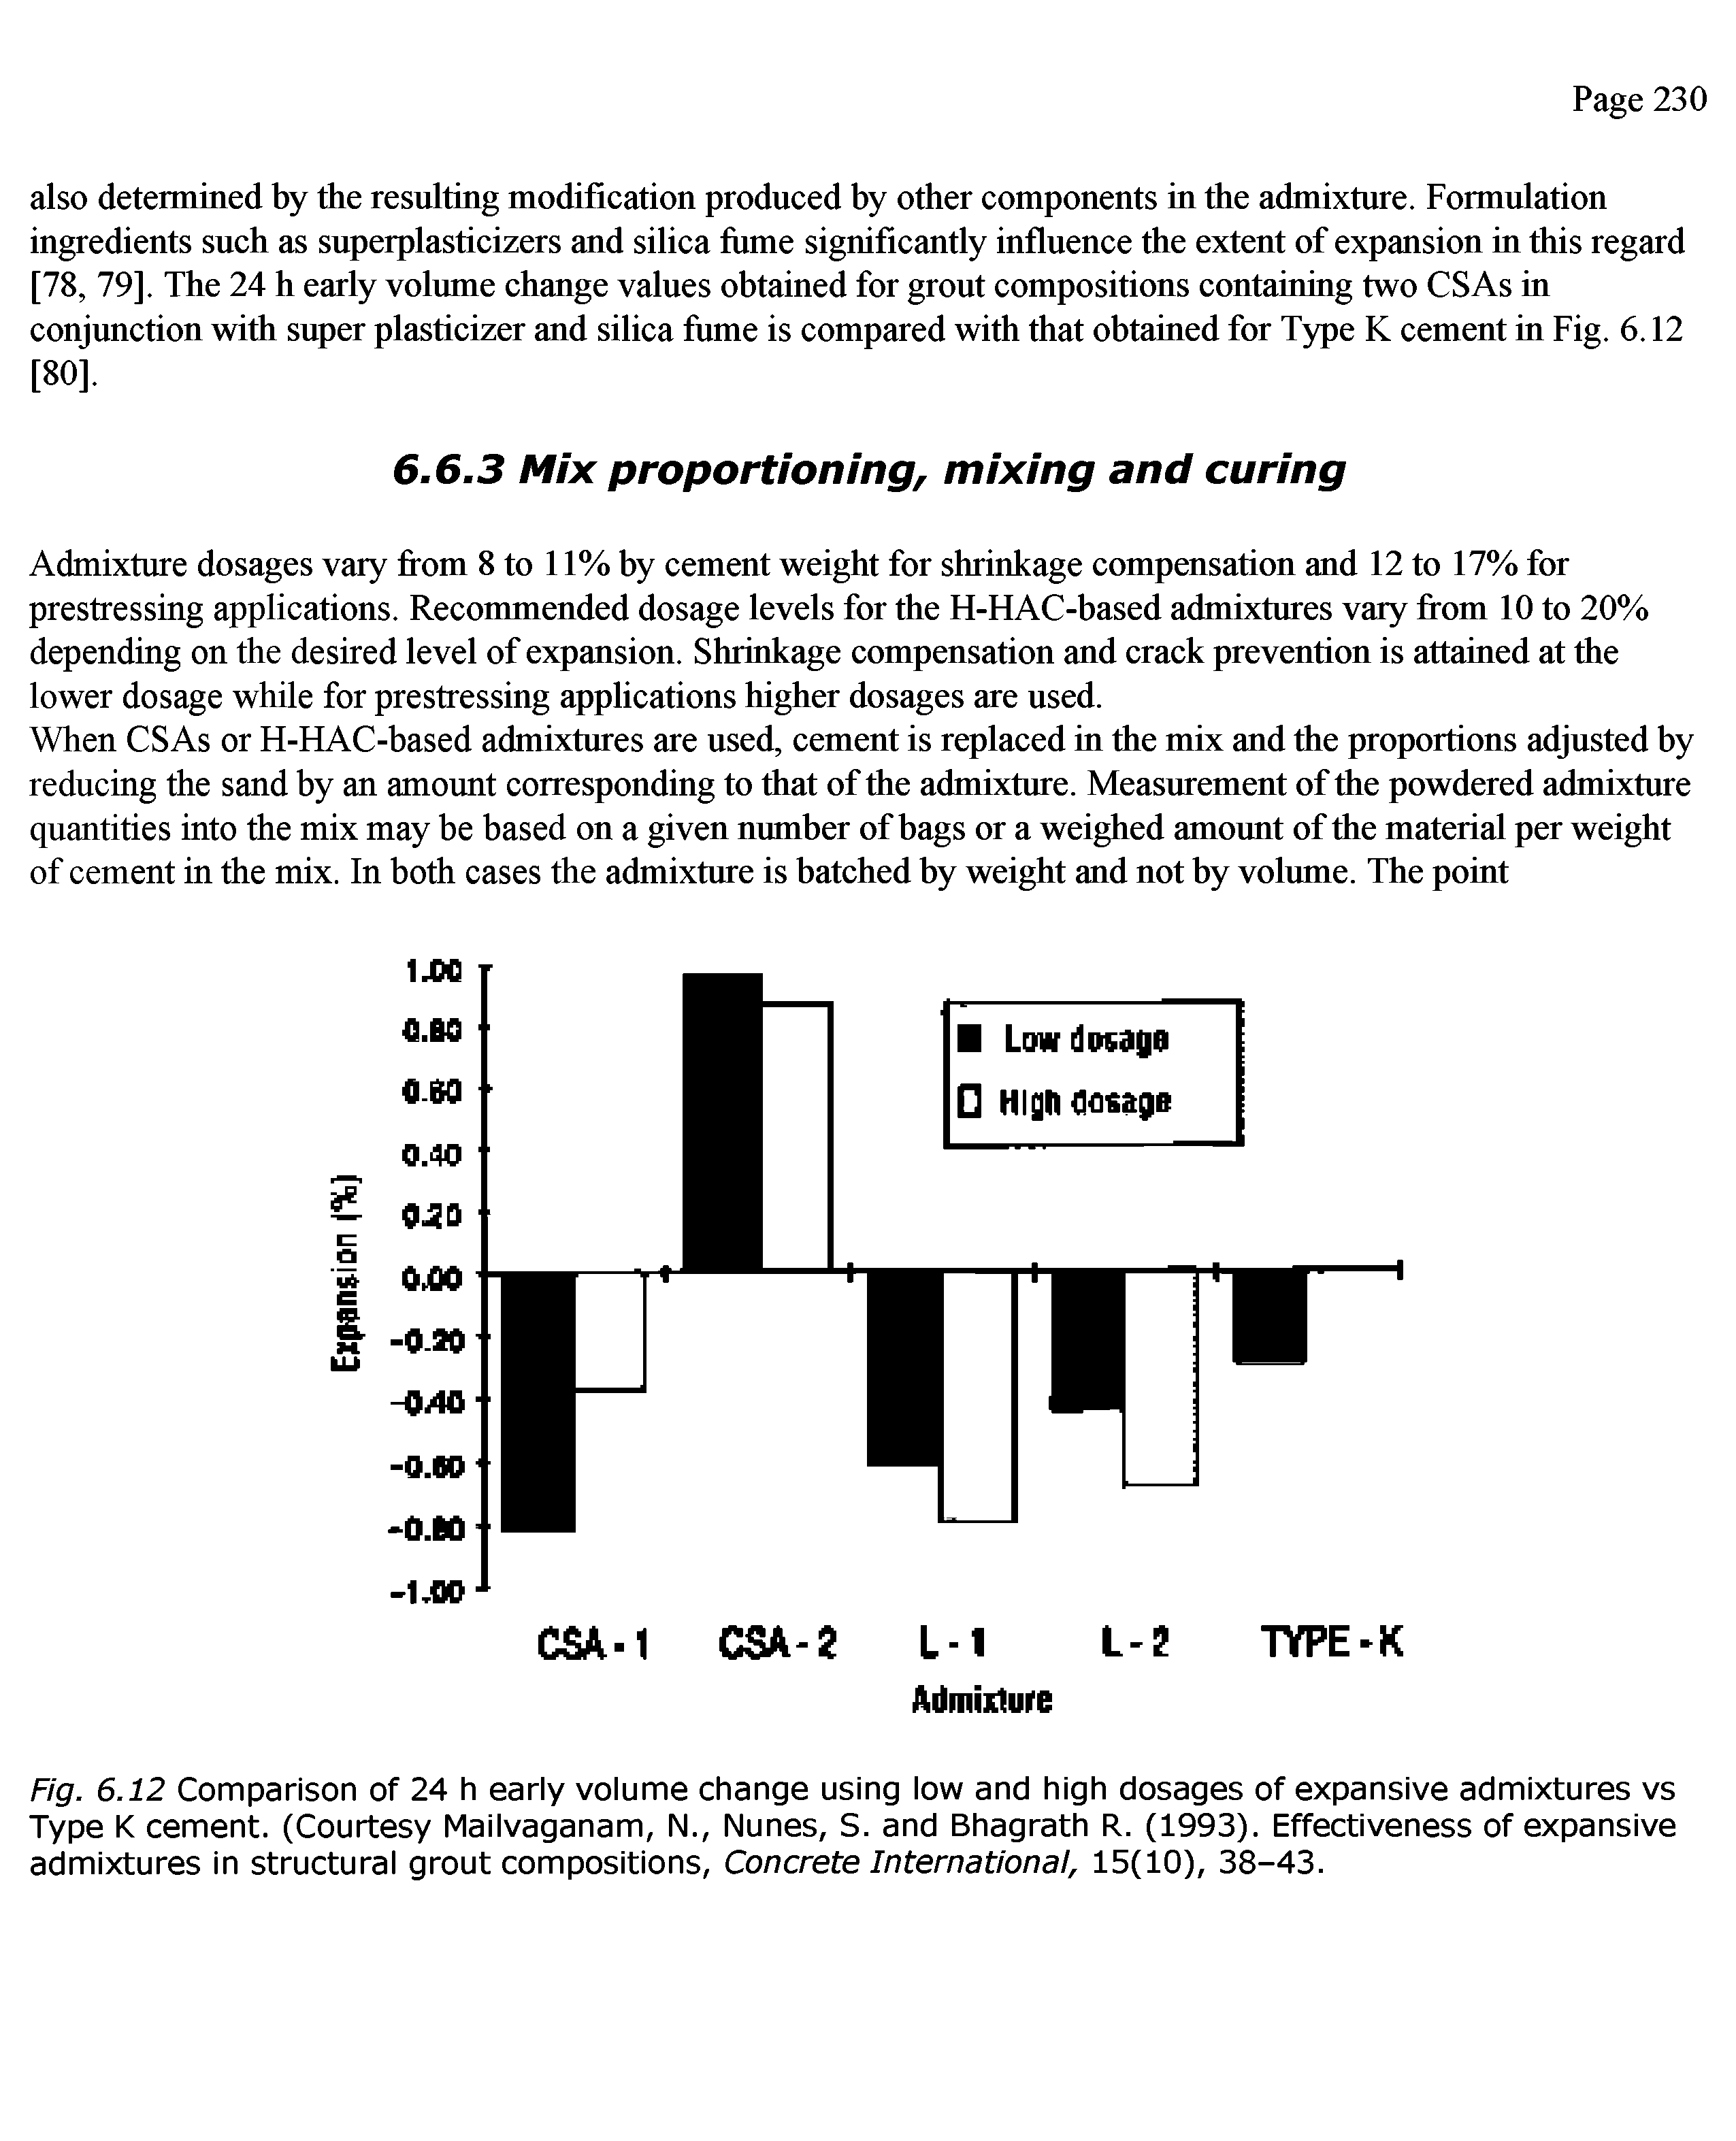 Fig. 6.12 Comparison of 24 h early volume change using low and high dosages of expansive admixtures vs Type K cement. (Courtesy Mailvaganam, N., Nunes, S. and Bhagrath R. (1993). Effectiveness of expansive admixtures in structural grout compositions, Concrete International, 15(10), 38-43.